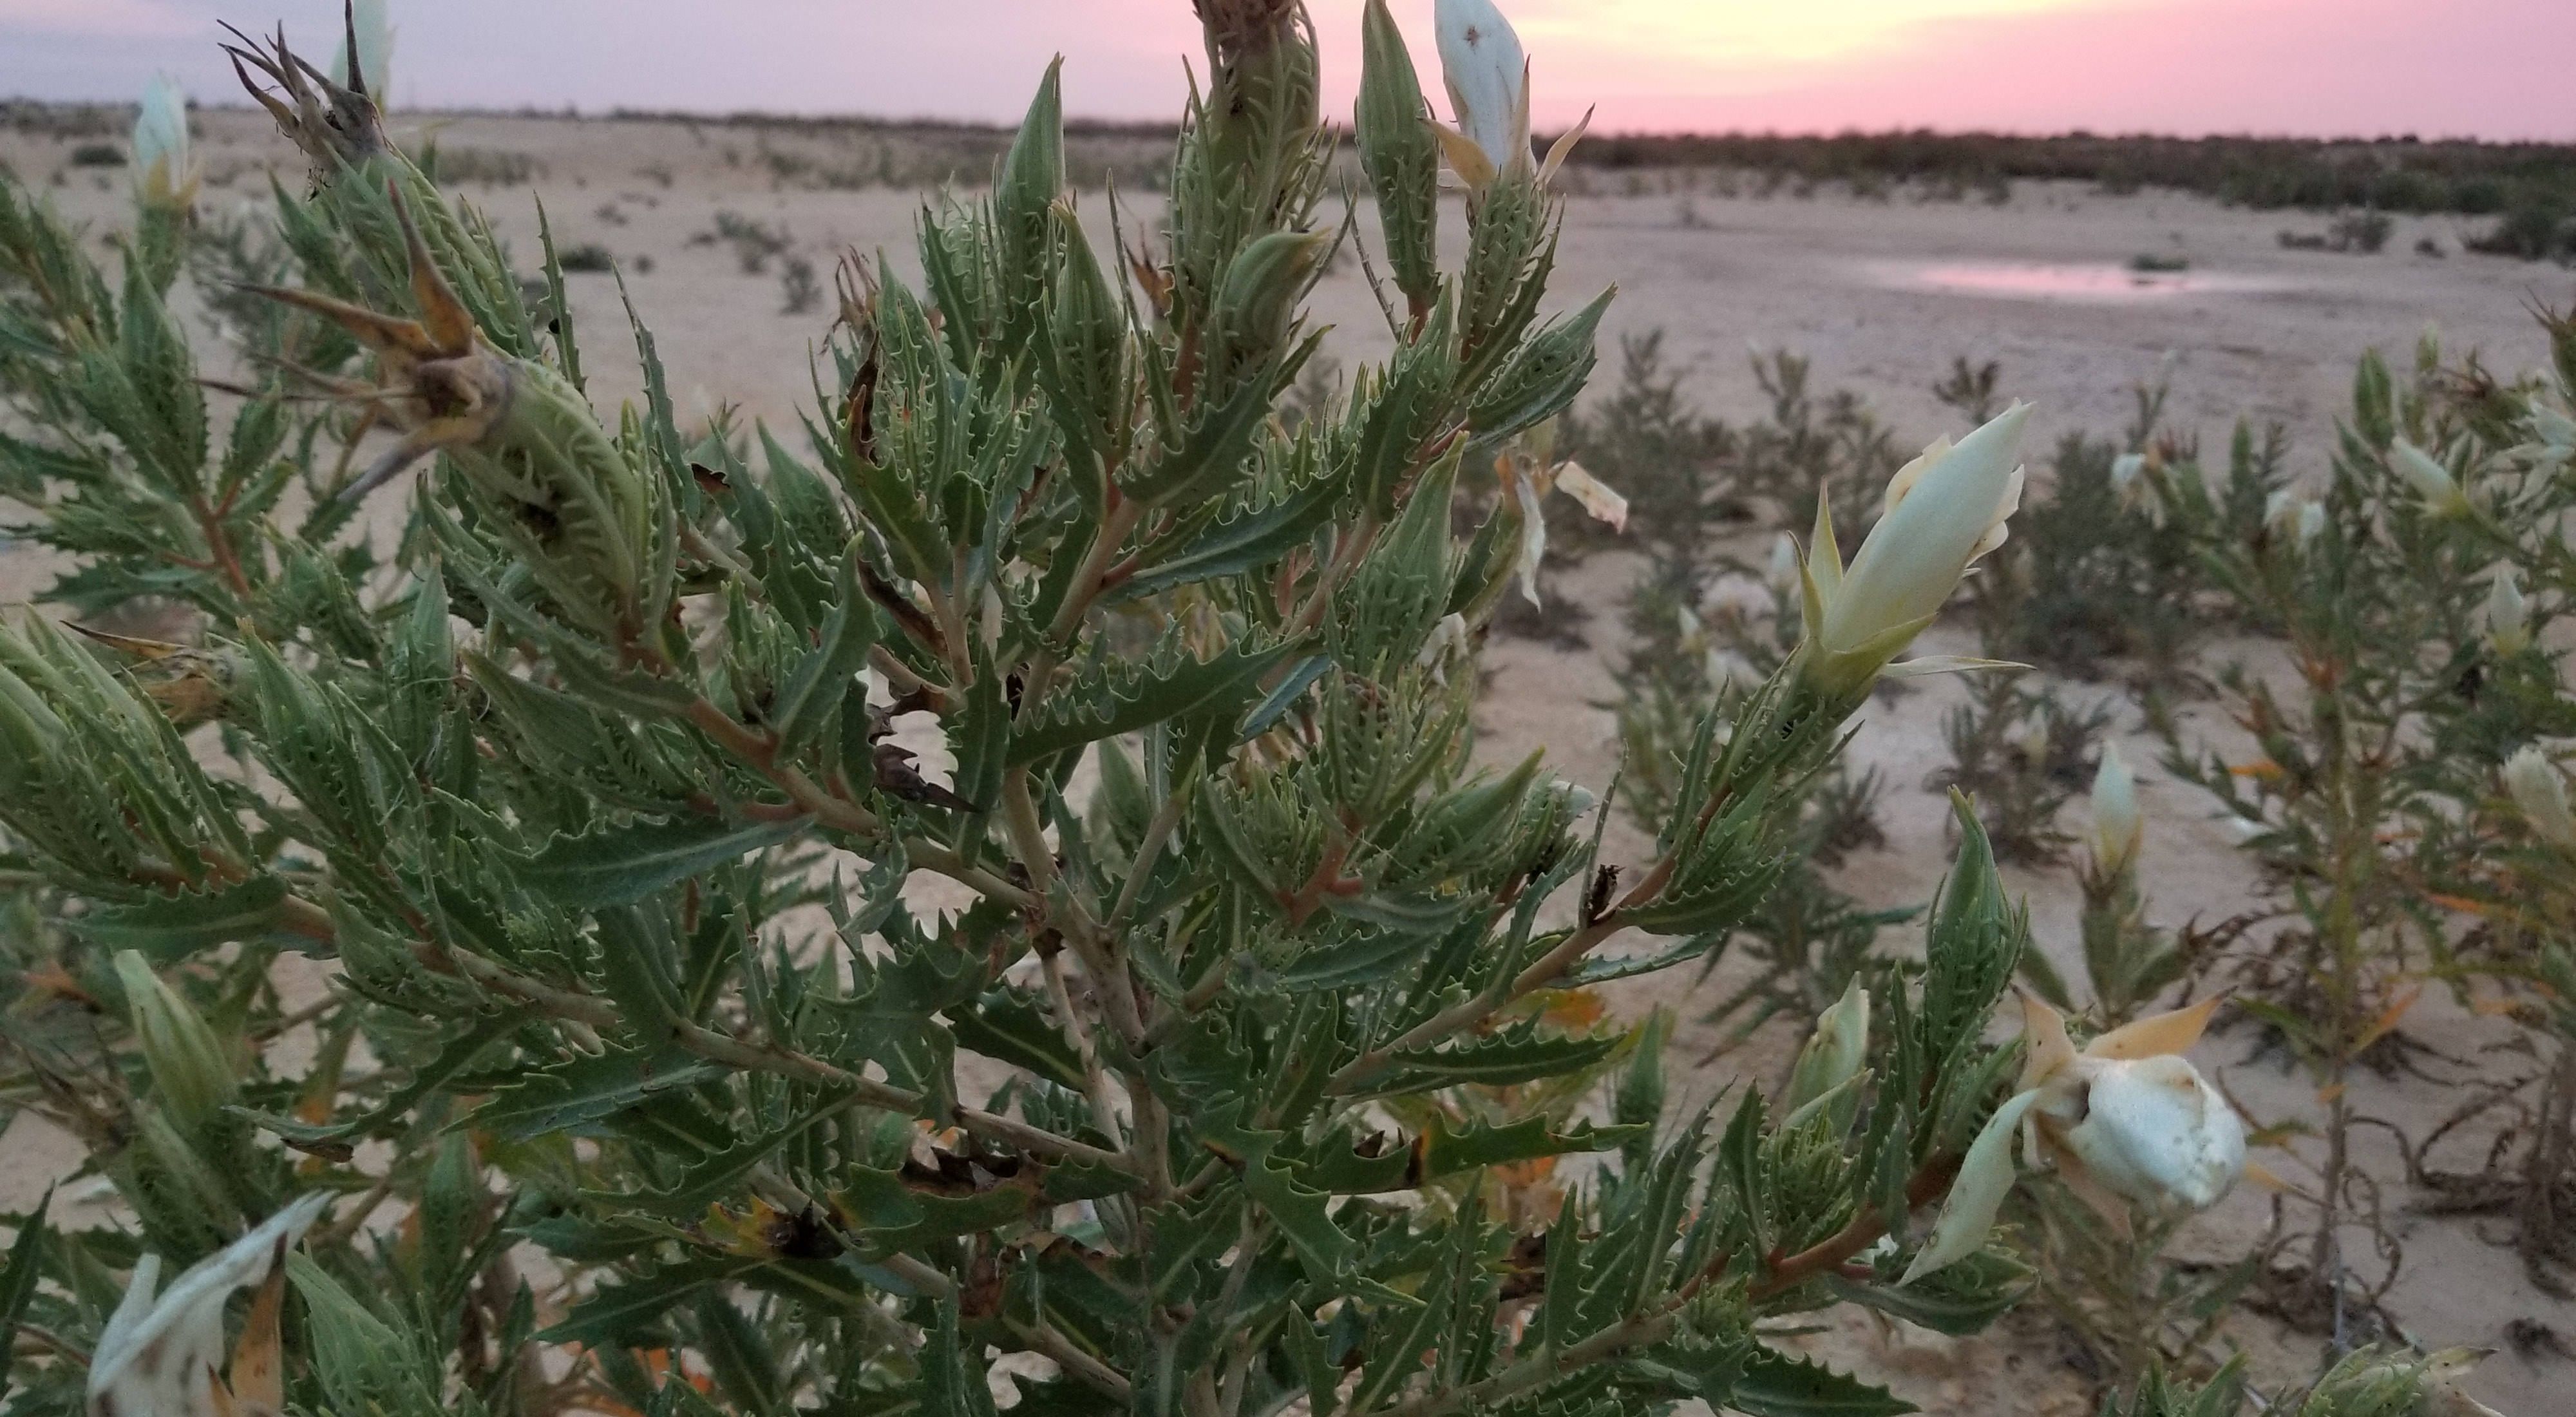 Closeup of white flower buds on a prickly-leaved plant with a desert sunset in the background.